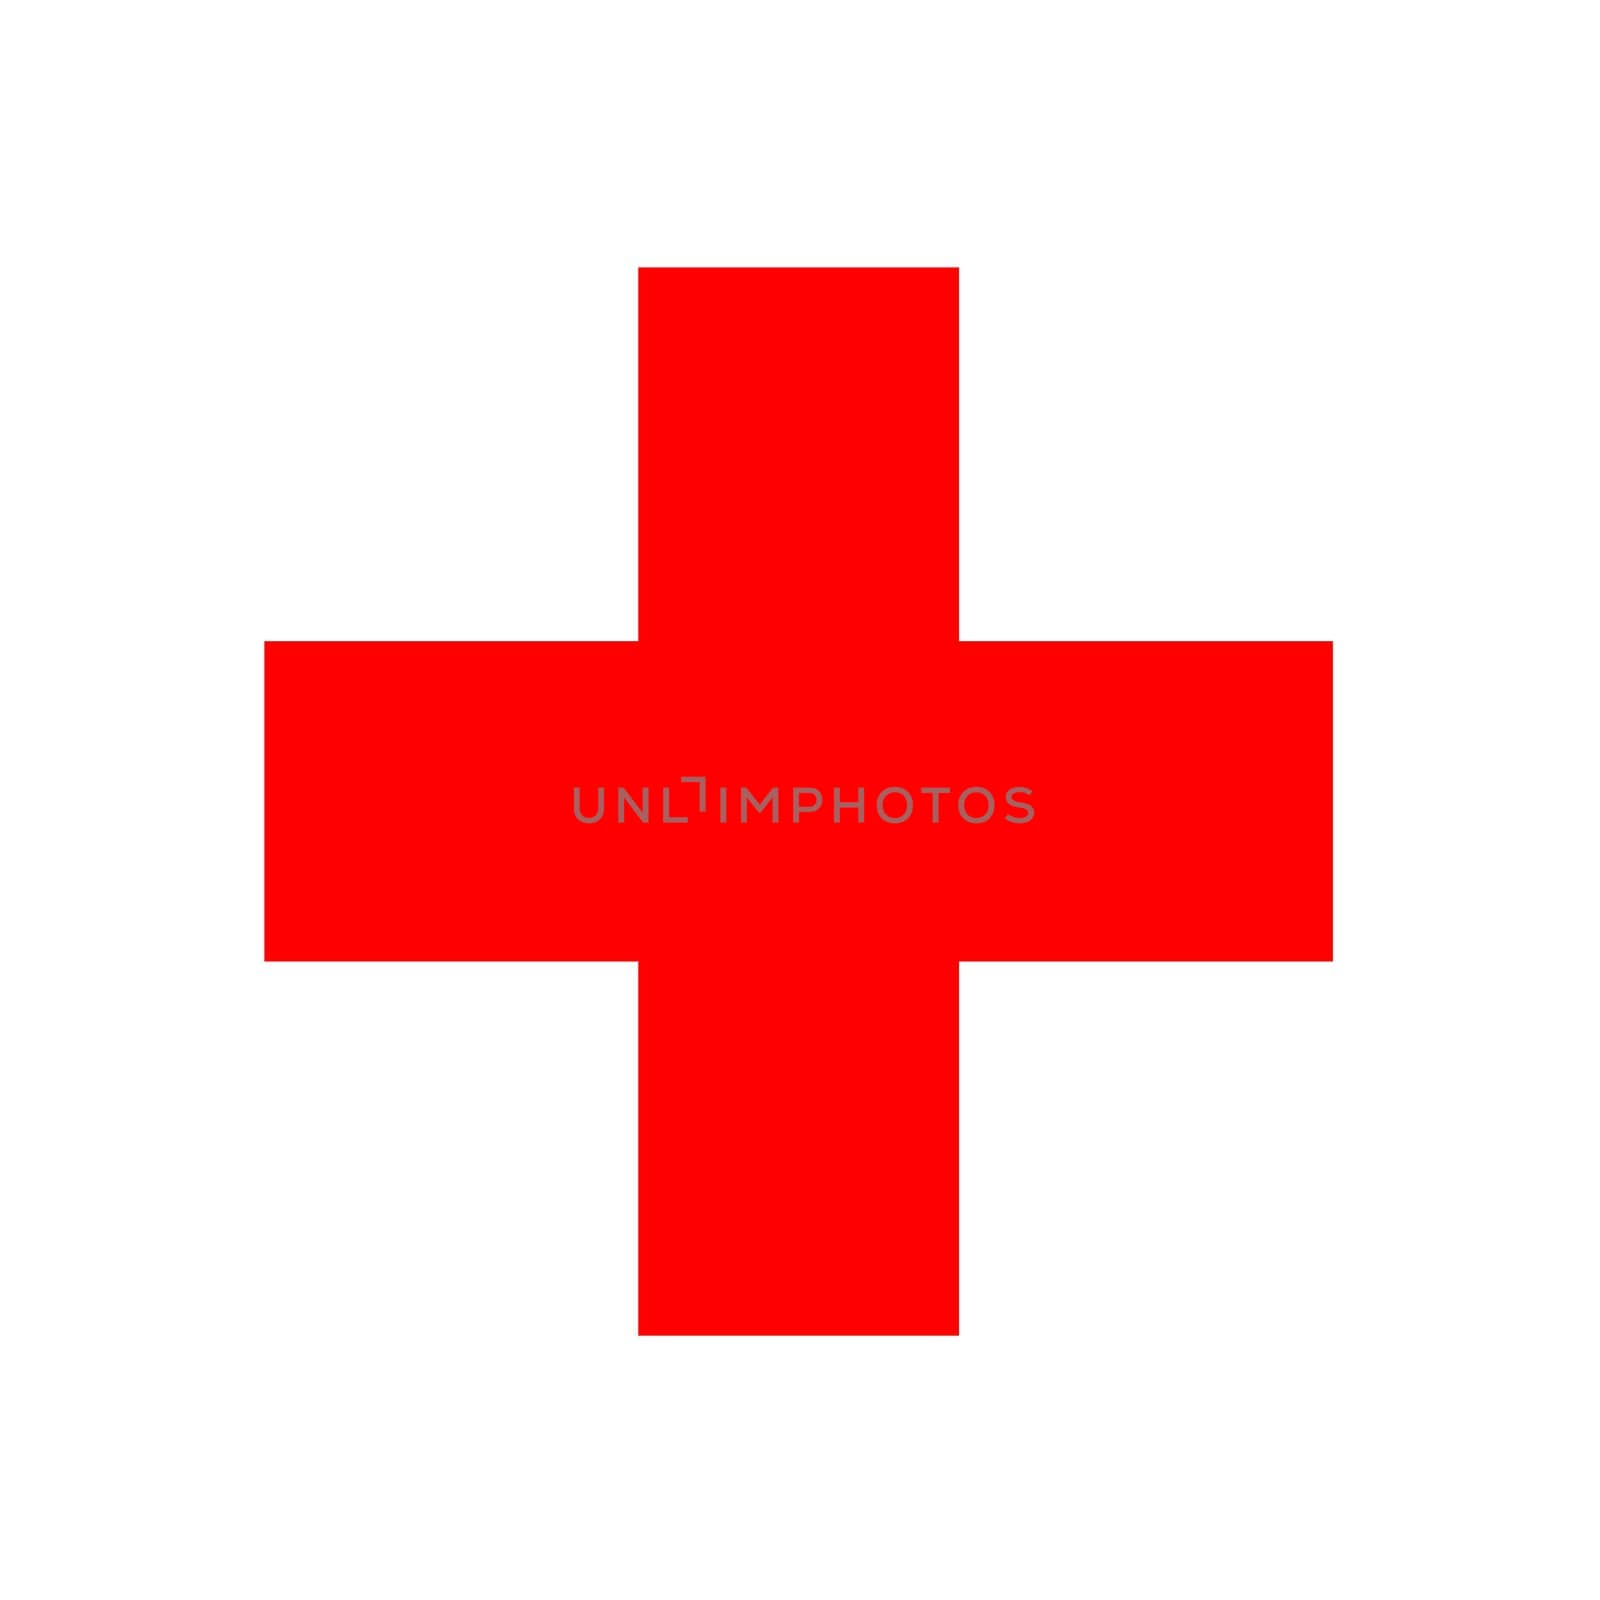 2D illustration of the Red Cross sign